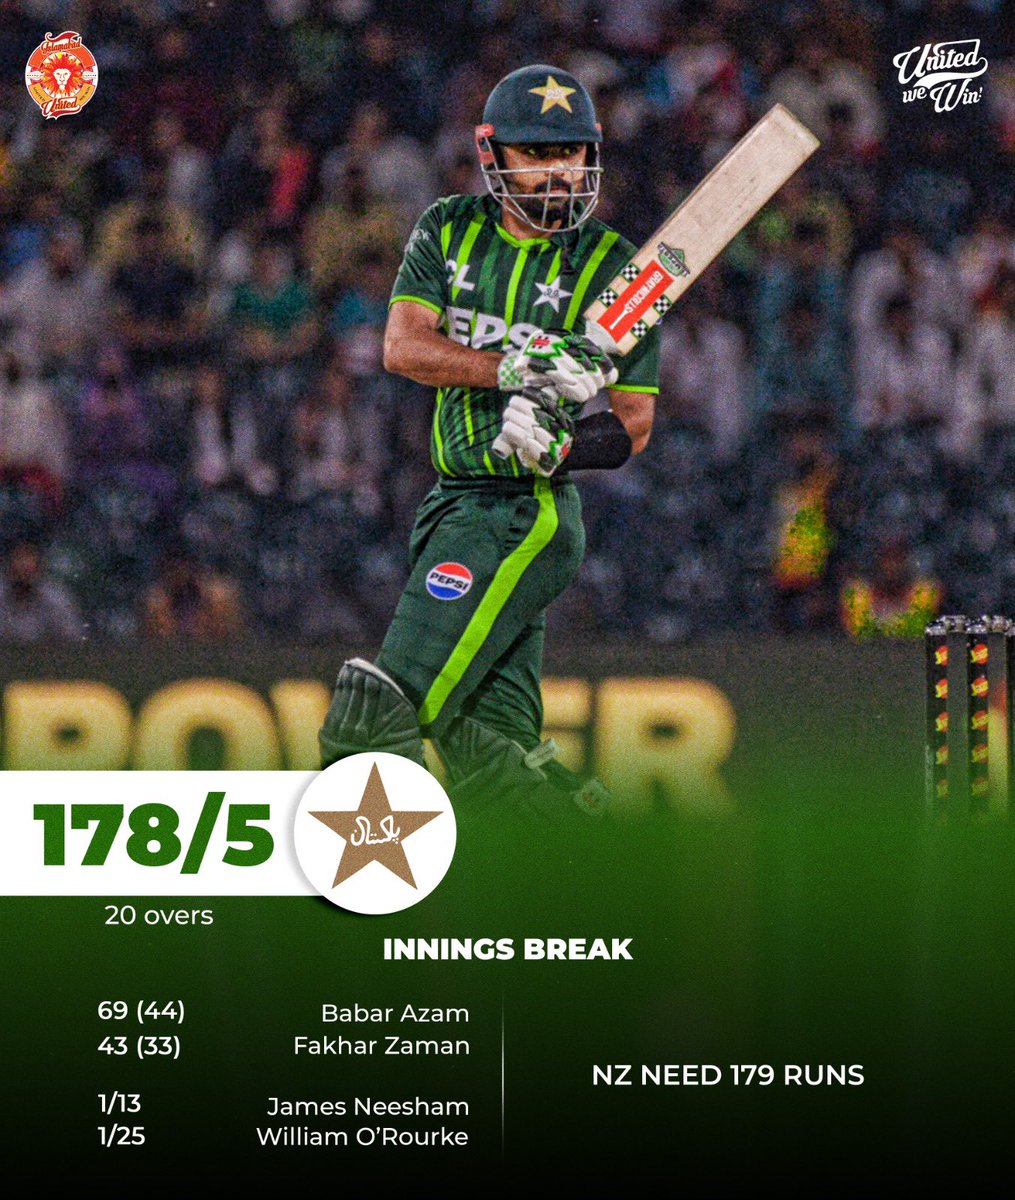 Pakistan sets a fighting total with 178/5 on the scoreboard! Babar Azam's stylish 69 off 44 and Fakhar's rapid 43 have laid the foundation.

Now it's up to our bowlers to capitalize on it!

#PAKvNZ #UnitedForPakistan